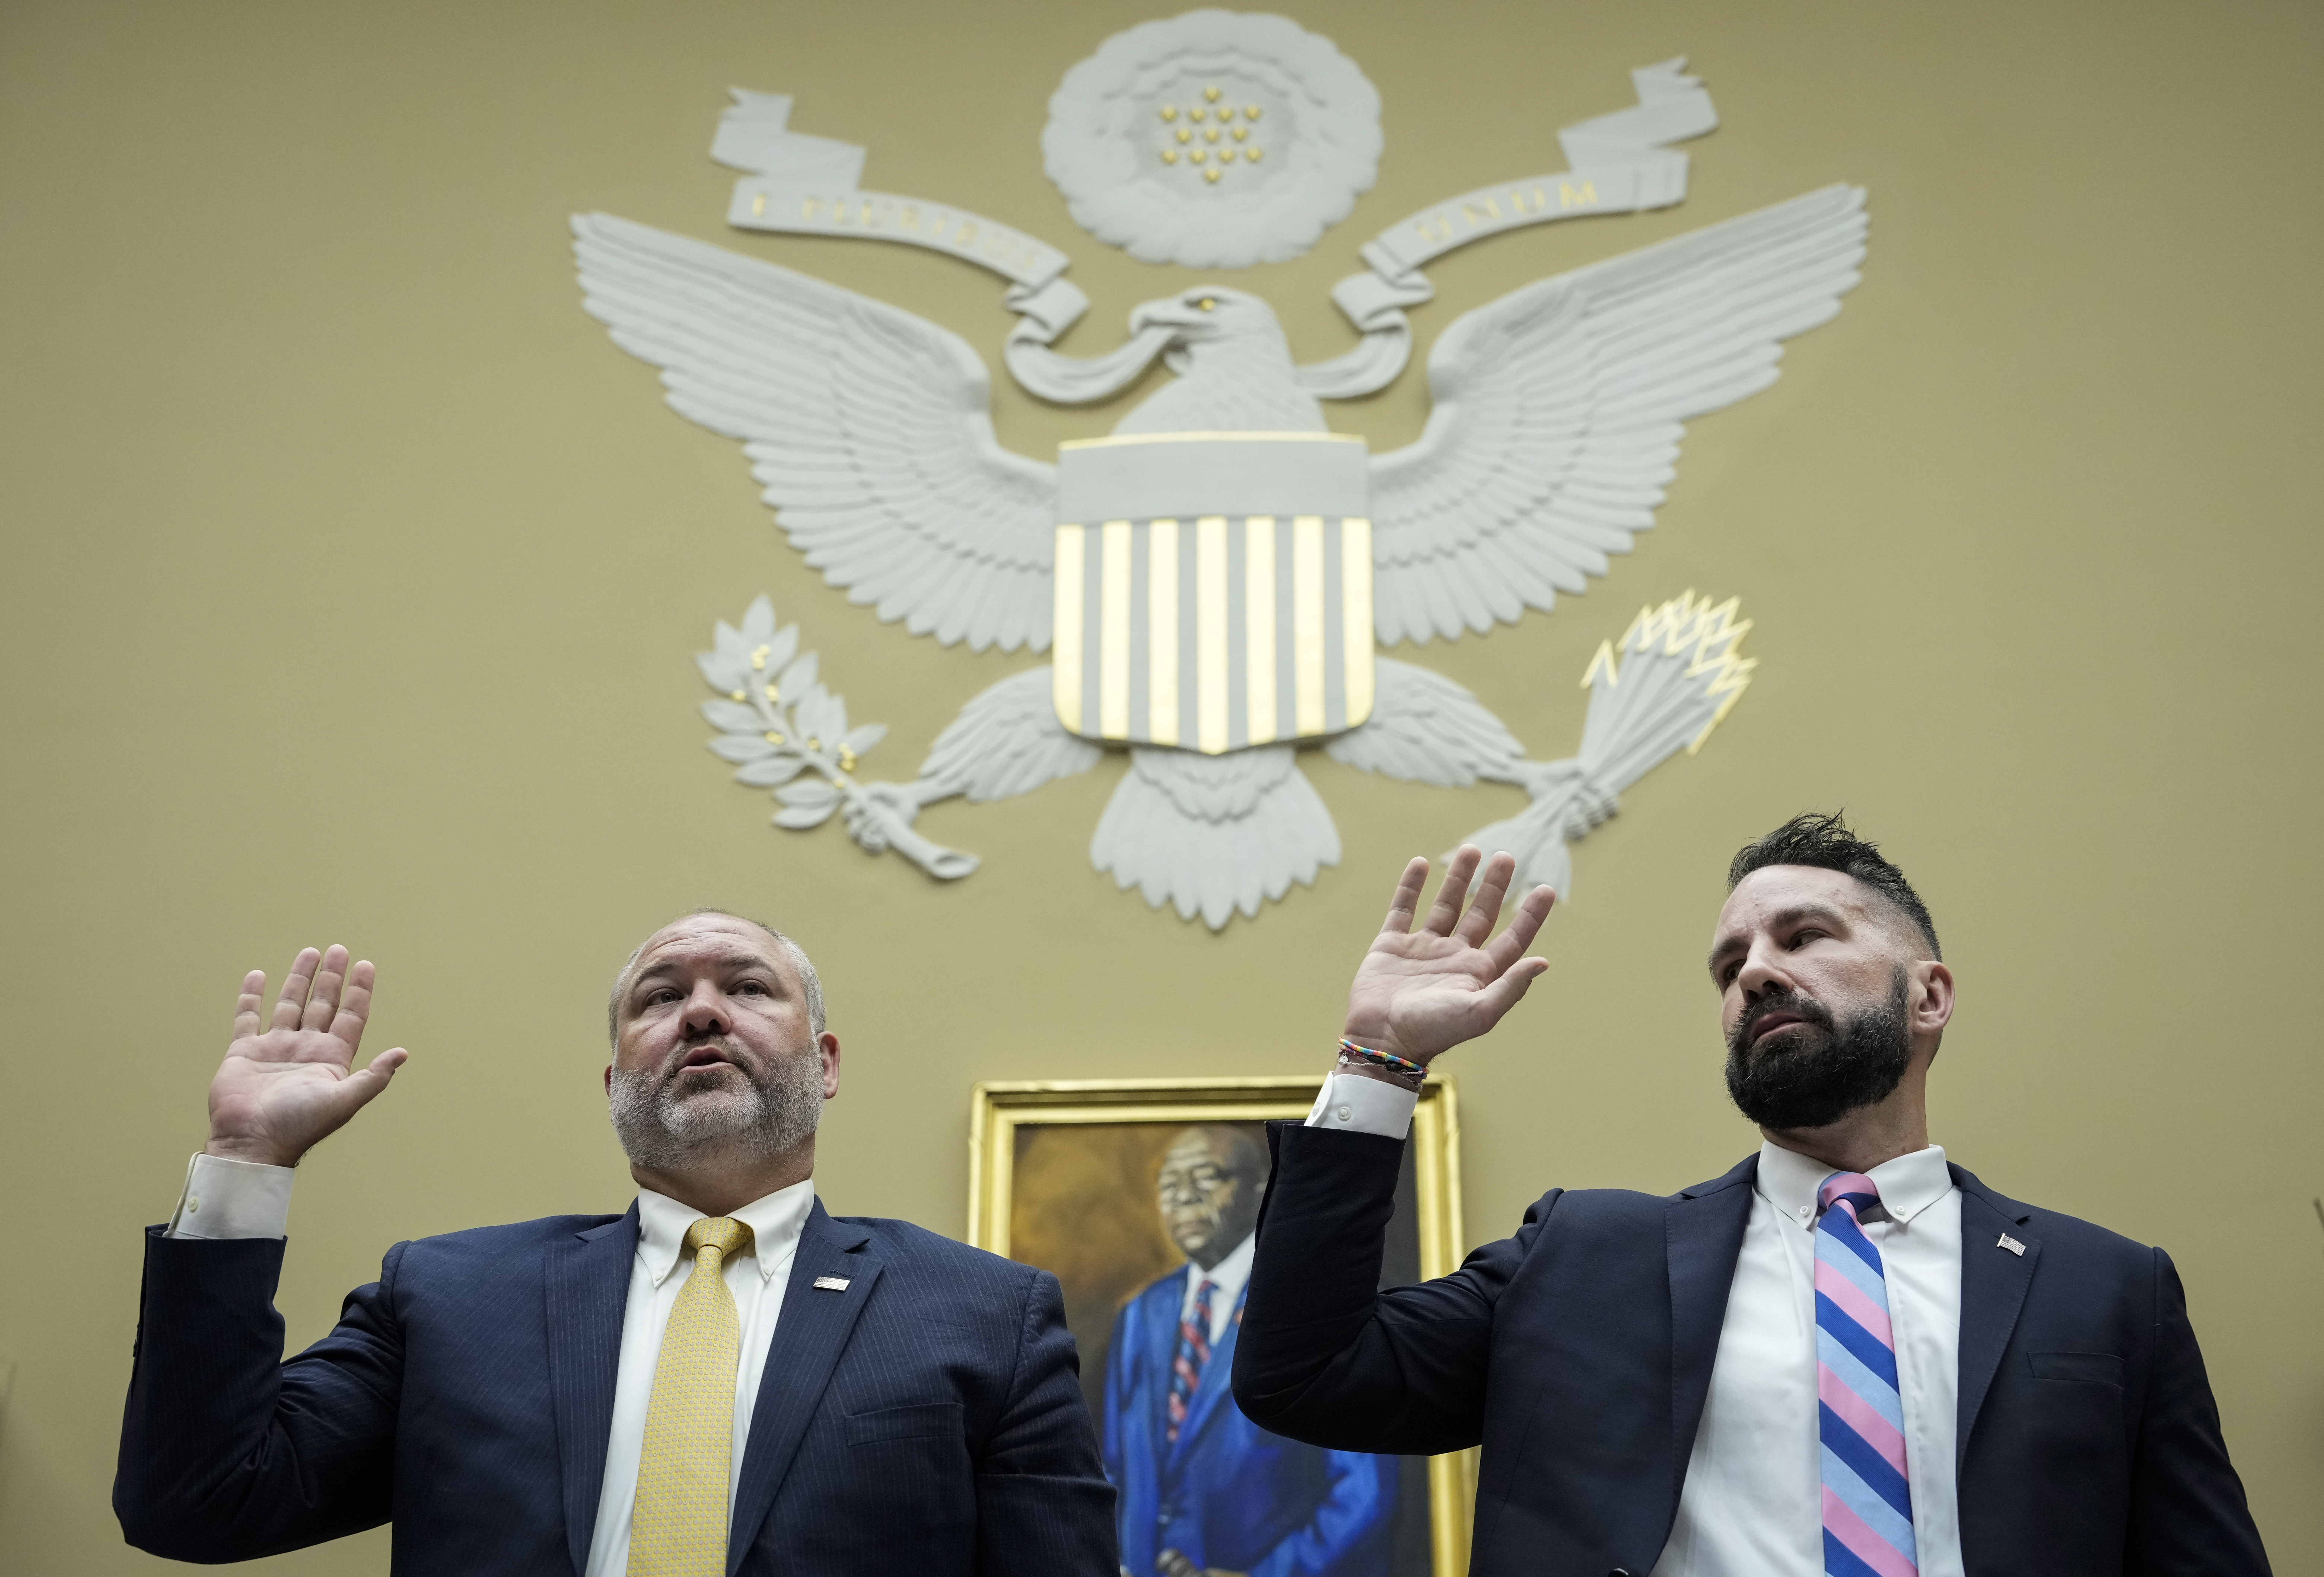 WASHINGTON, DC - JULY 19: (L-R) Supervisory IRS Special Agent Gary Shapley and IRS Criminal Investigator Joseph Ziegler are sworn-in during a House Oversight Committee hearing related to the Justice Department's investigation of Hunter Biden, on Capitol Hill July 19, 2023 in Washington, DC. The committee heard testimony from two whistleblowers from the Internal Revenue Service who allege that the Hunter Biden criminal probe was mishandled by the Department of Justice. (Photo by Drew Angerer/Getty Images)